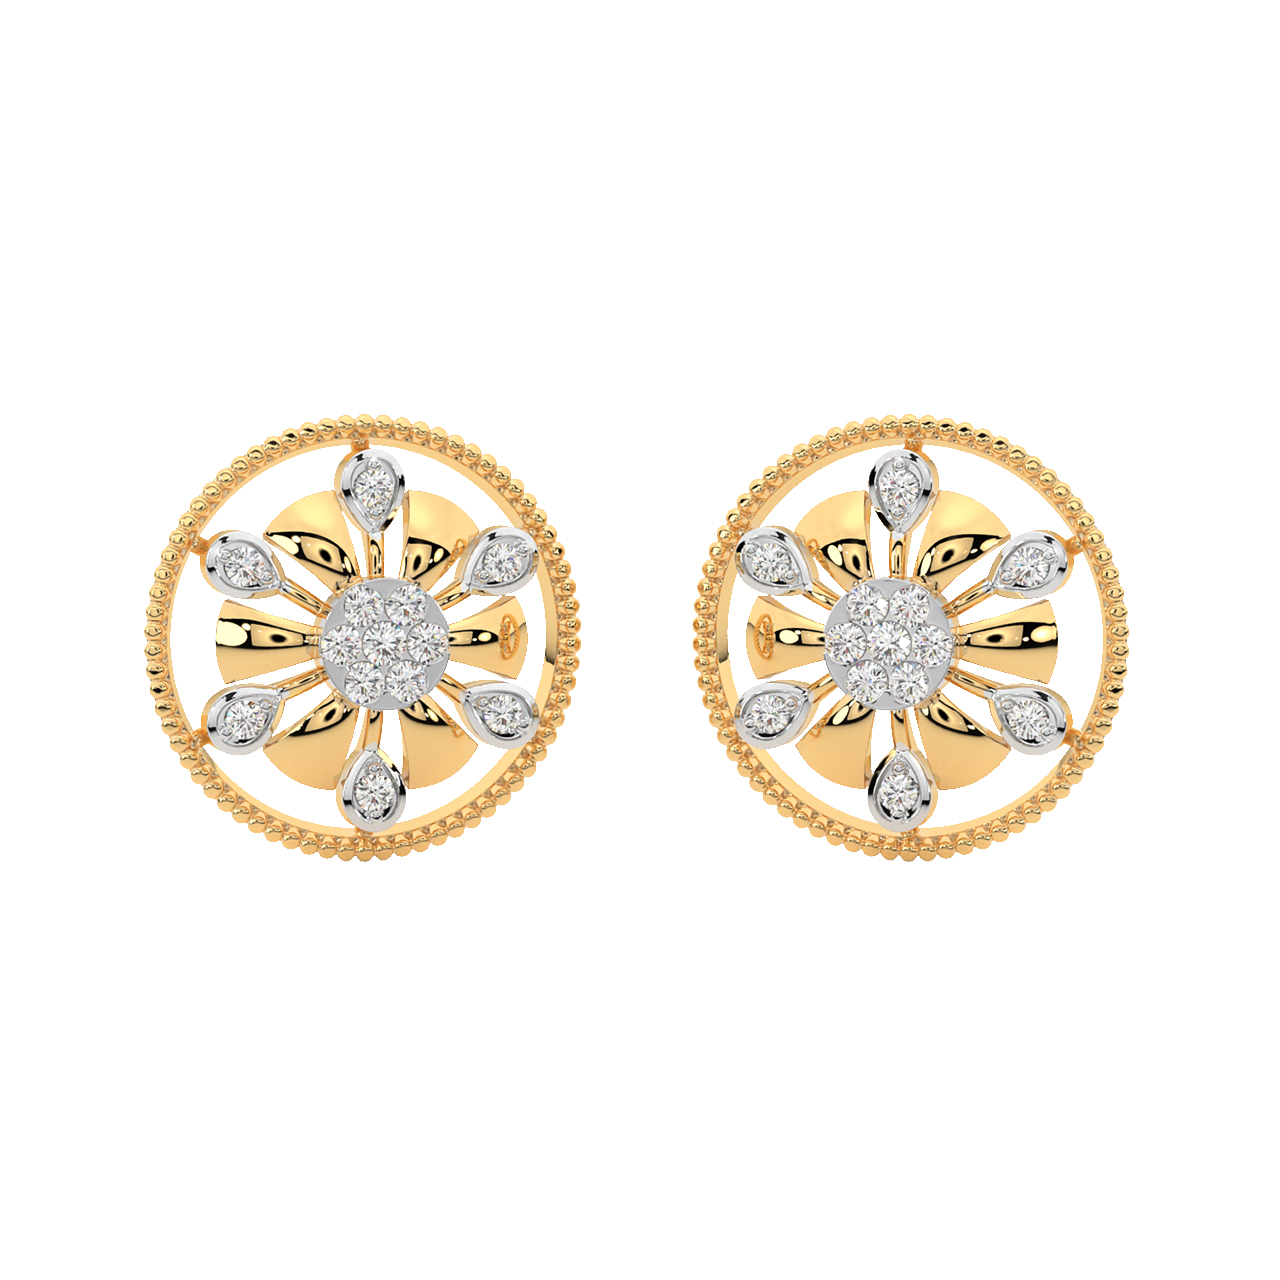 1 Ct. Round Art Deco Design Diamond Earring With Pink Sapphire In 14K  Yellow Gold | Fascinating Diamonds